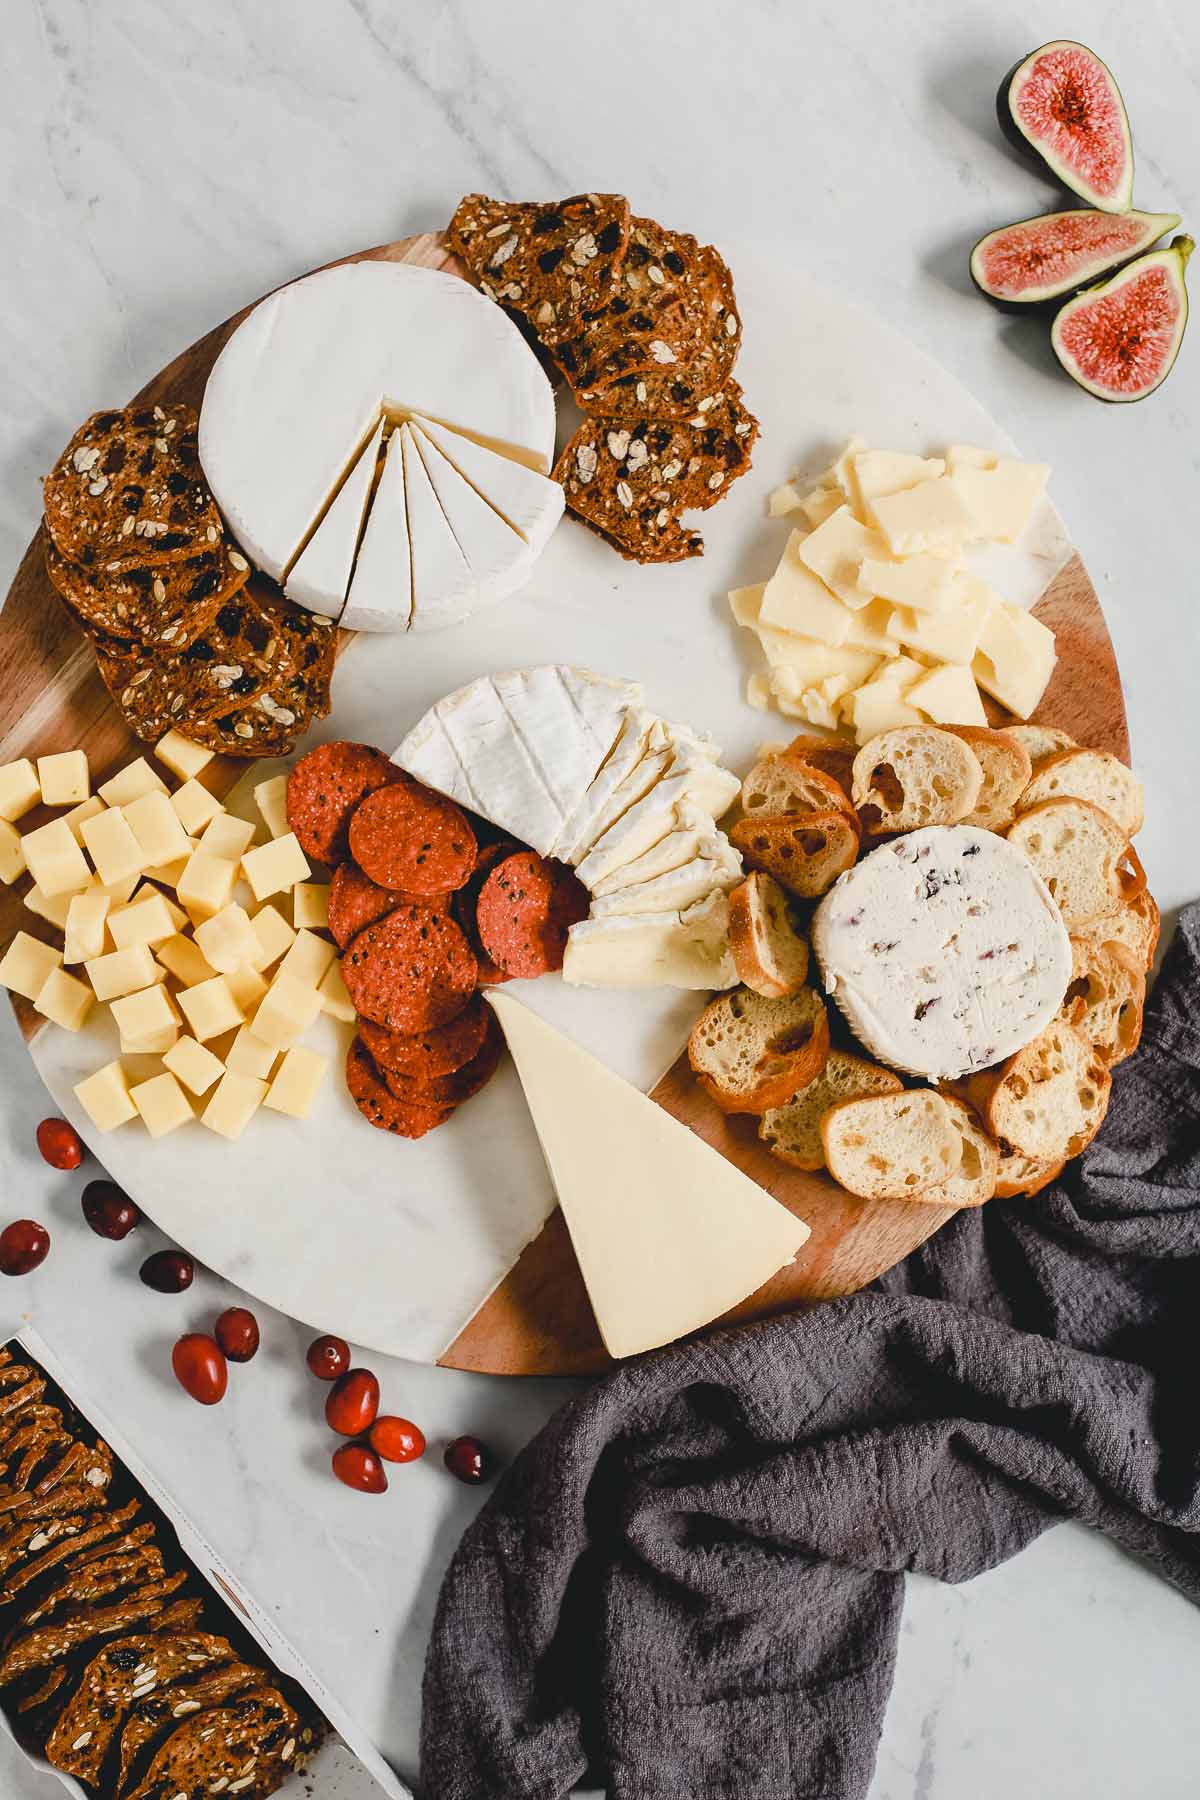 arranging a charcuterie board with meat, cheese, crackers, and fruit